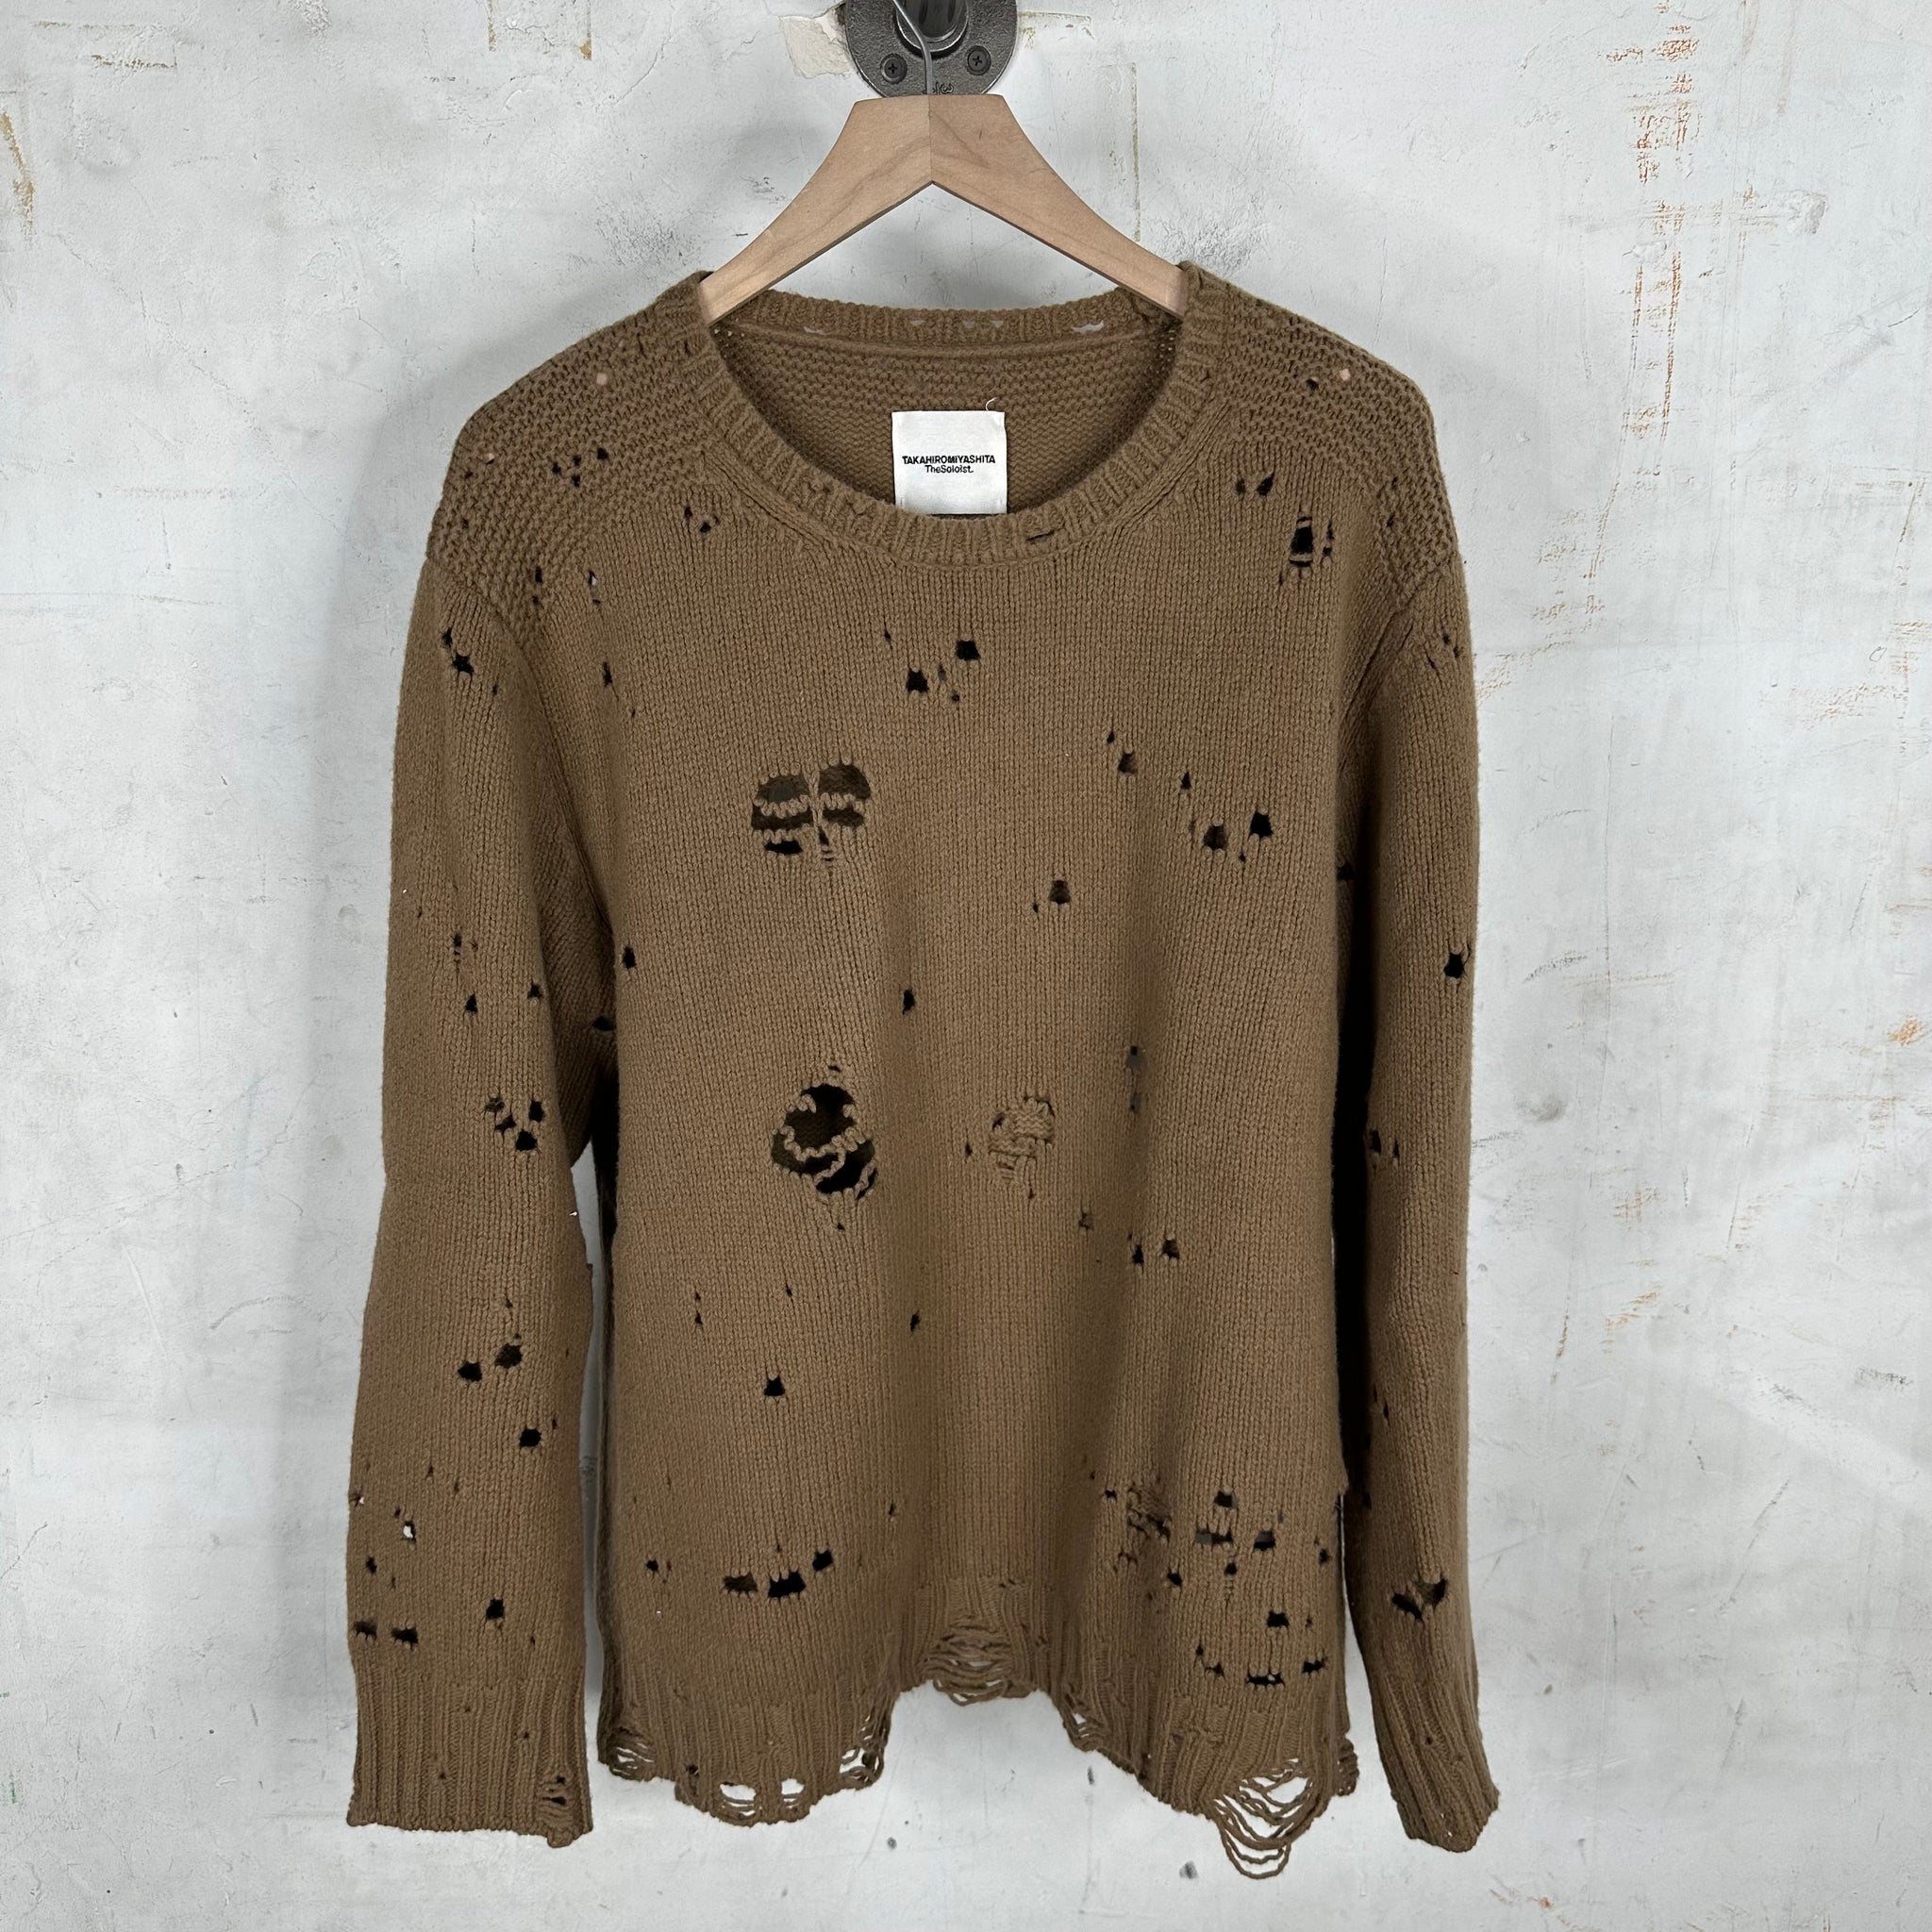 The Soloist Distressed Sweater